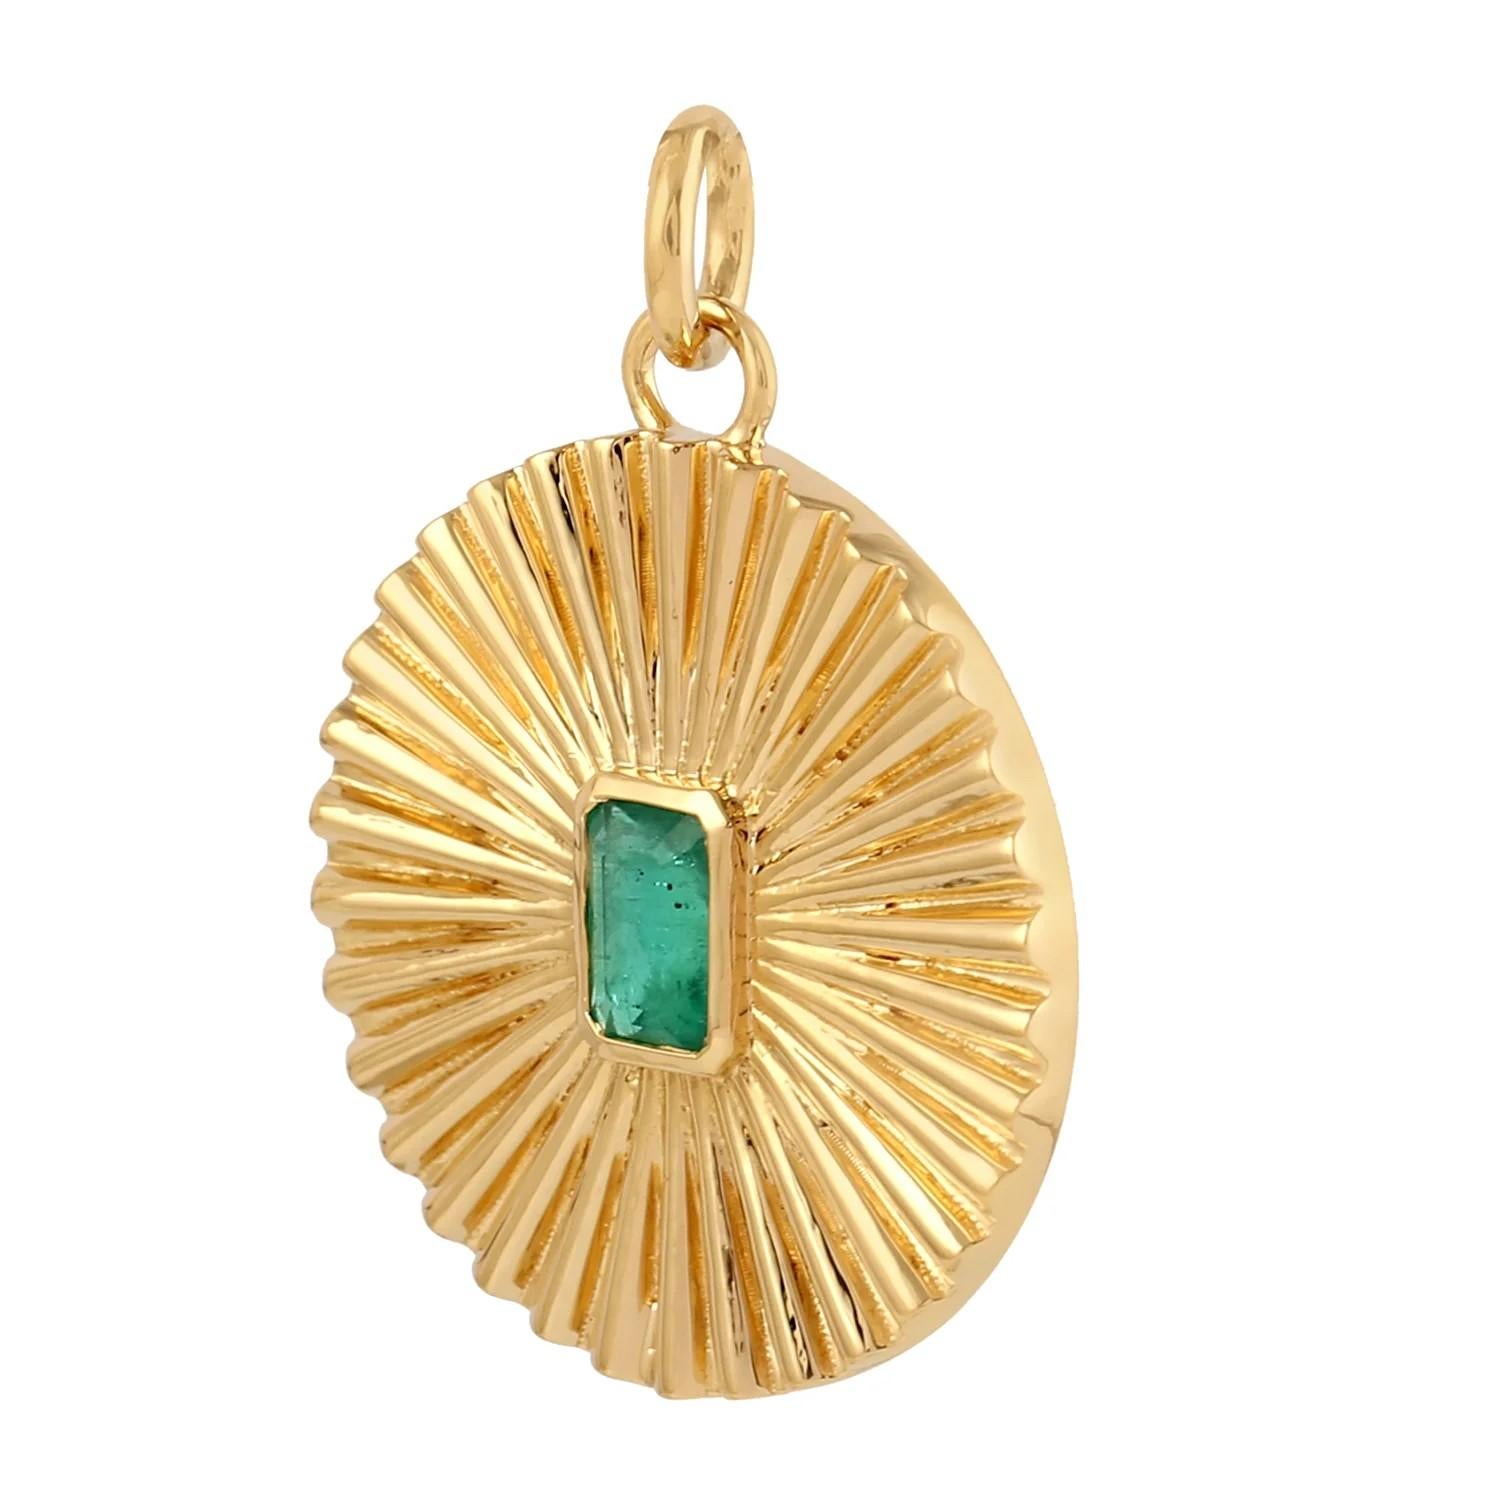 The 14 karat gold pendant is hand set with .61 carats emerald. Auras are thought of as the unseen field of energy surrounding a person's physical body. They're affected by our mood and emotional state.

FOLLOW MEGHNA JEWELS storefront to view the